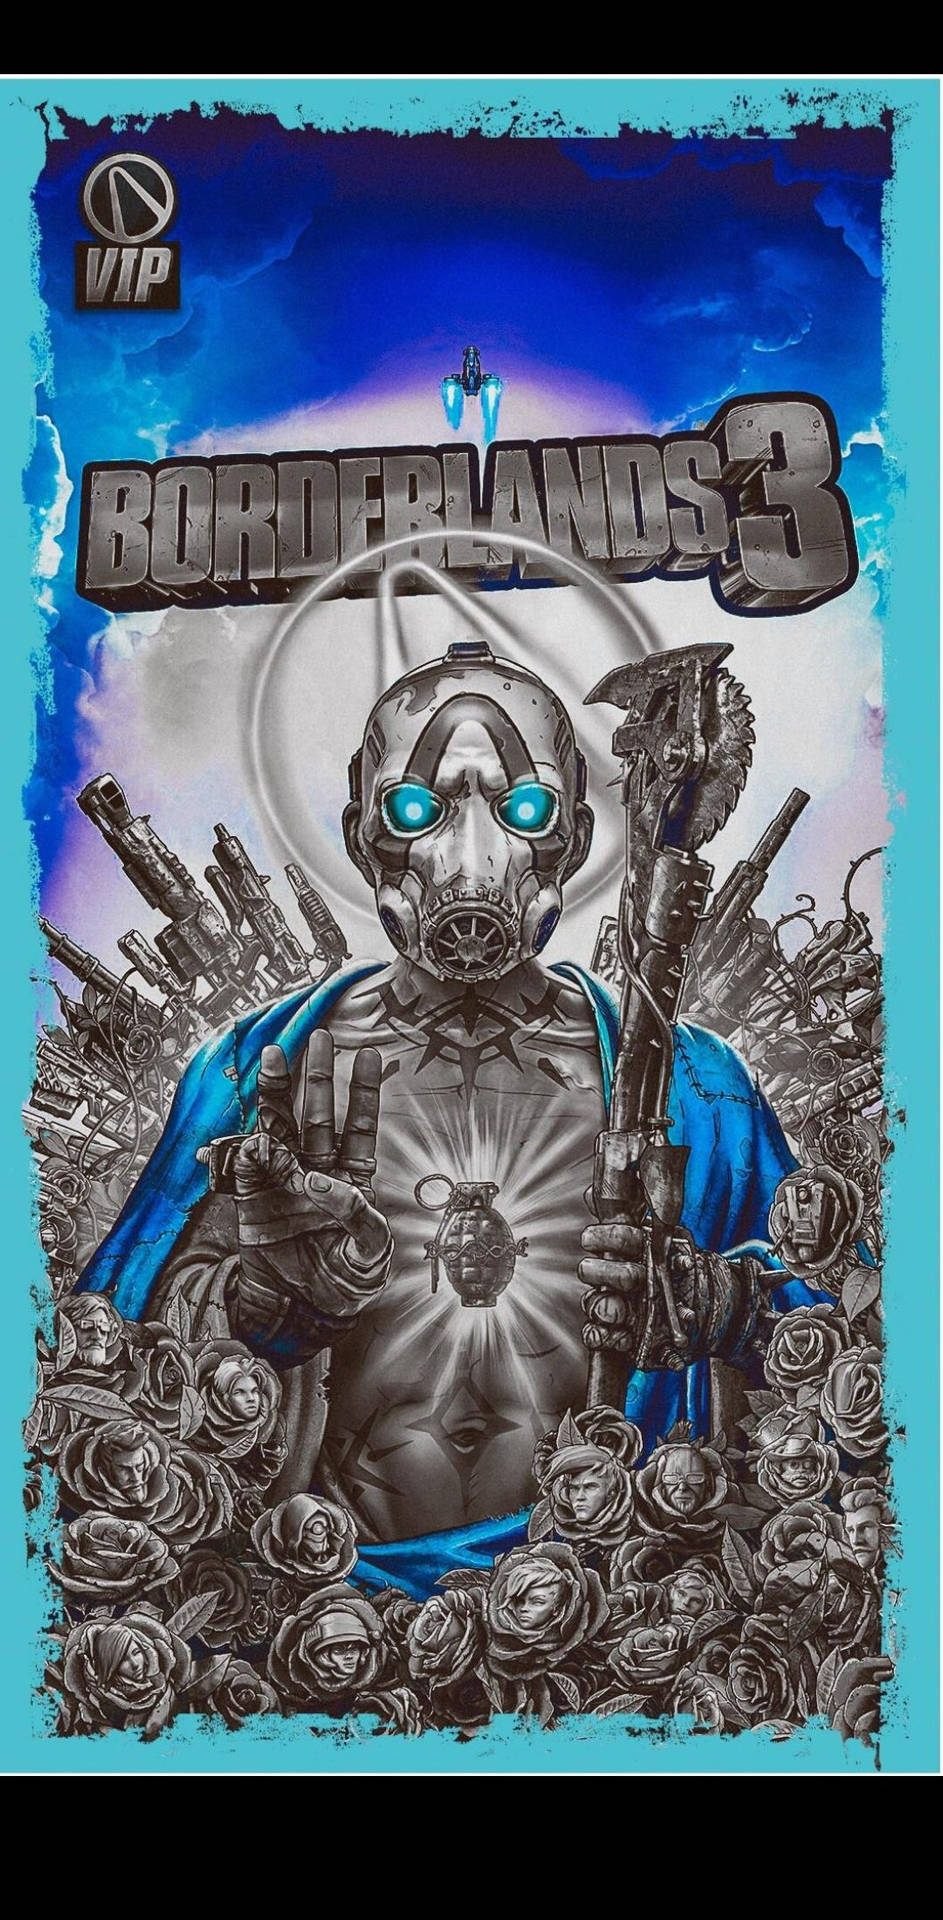 Explore the imaginative world of Borderlands like never before with the new Borderlands iPhone Wallpaper